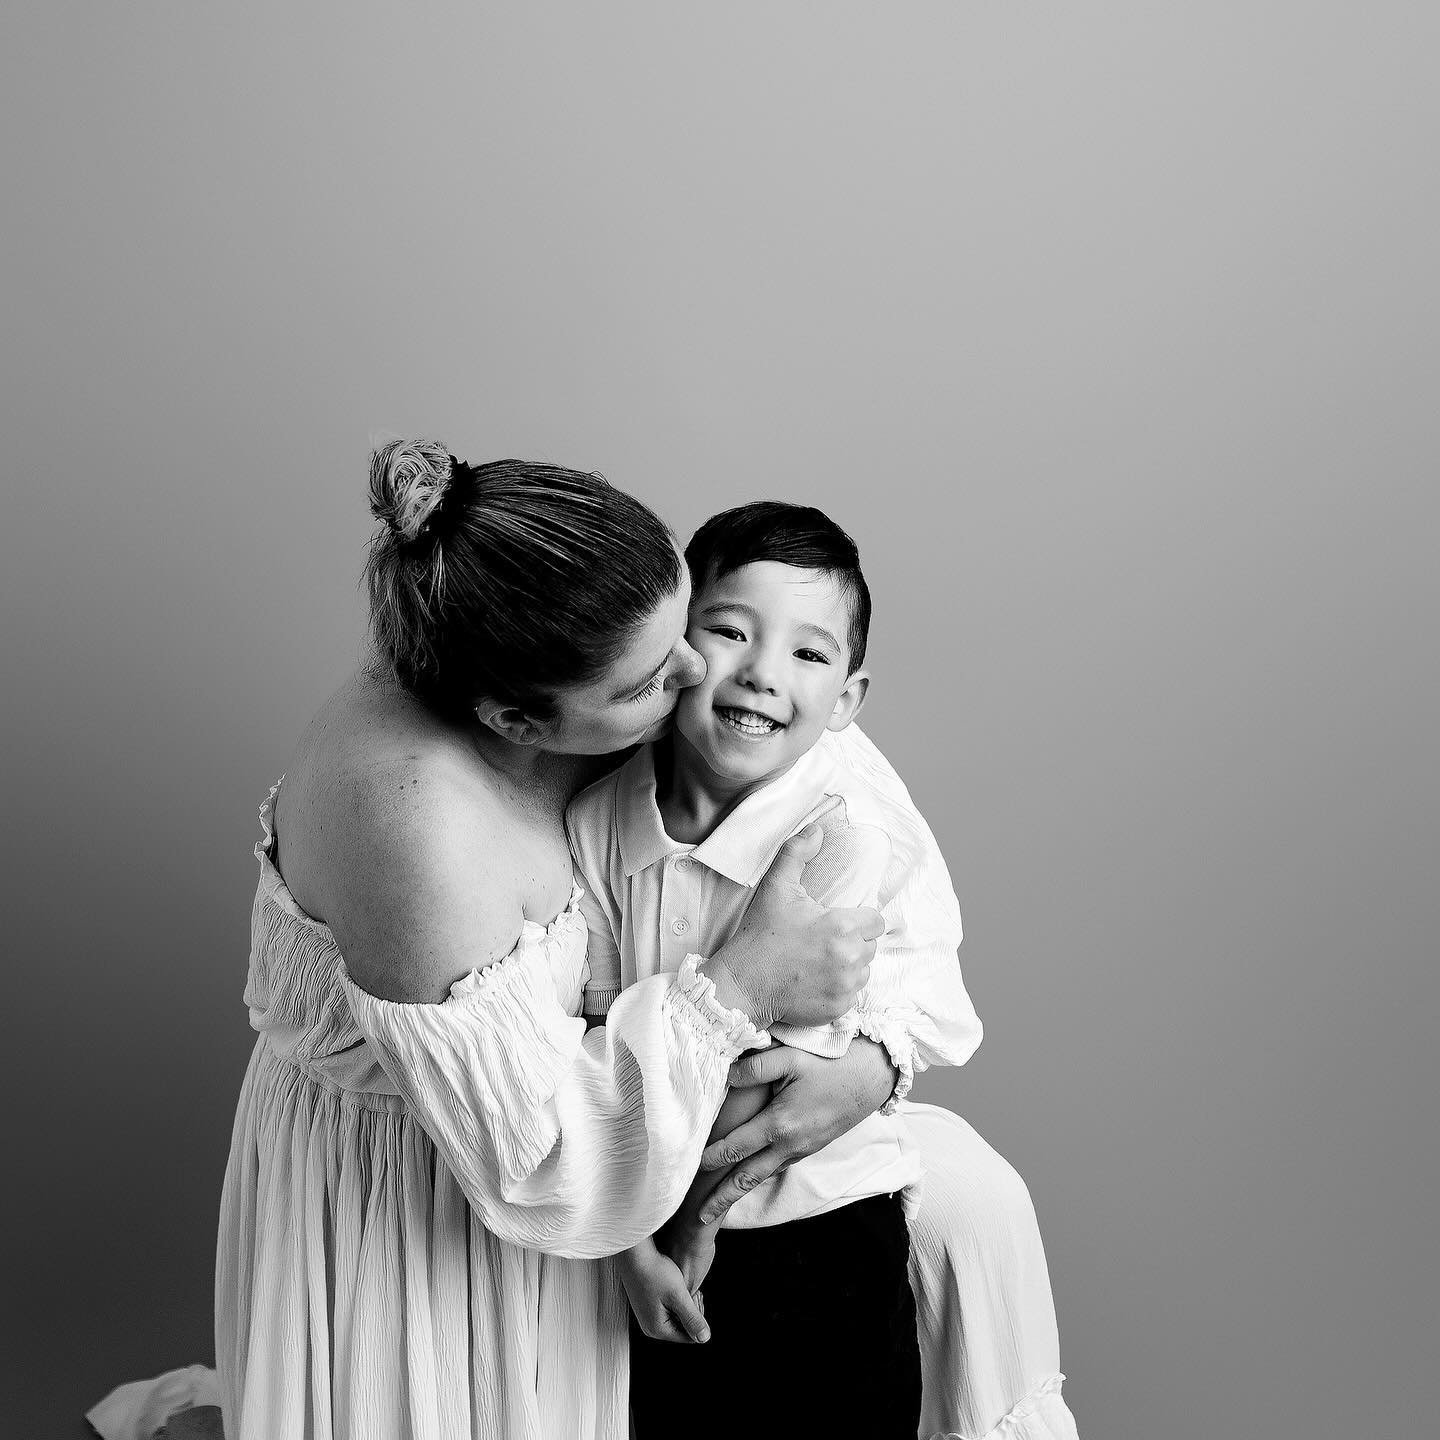 🌼 Calling all mamas! Motherhood minis happening this Saturday &amp; May 11 &ndash; don&rsquo;t miss out! 📸 Still a few spots left to capture those precious moments with your little ones in my spacious new studio in West Edmonton. For just $150, you